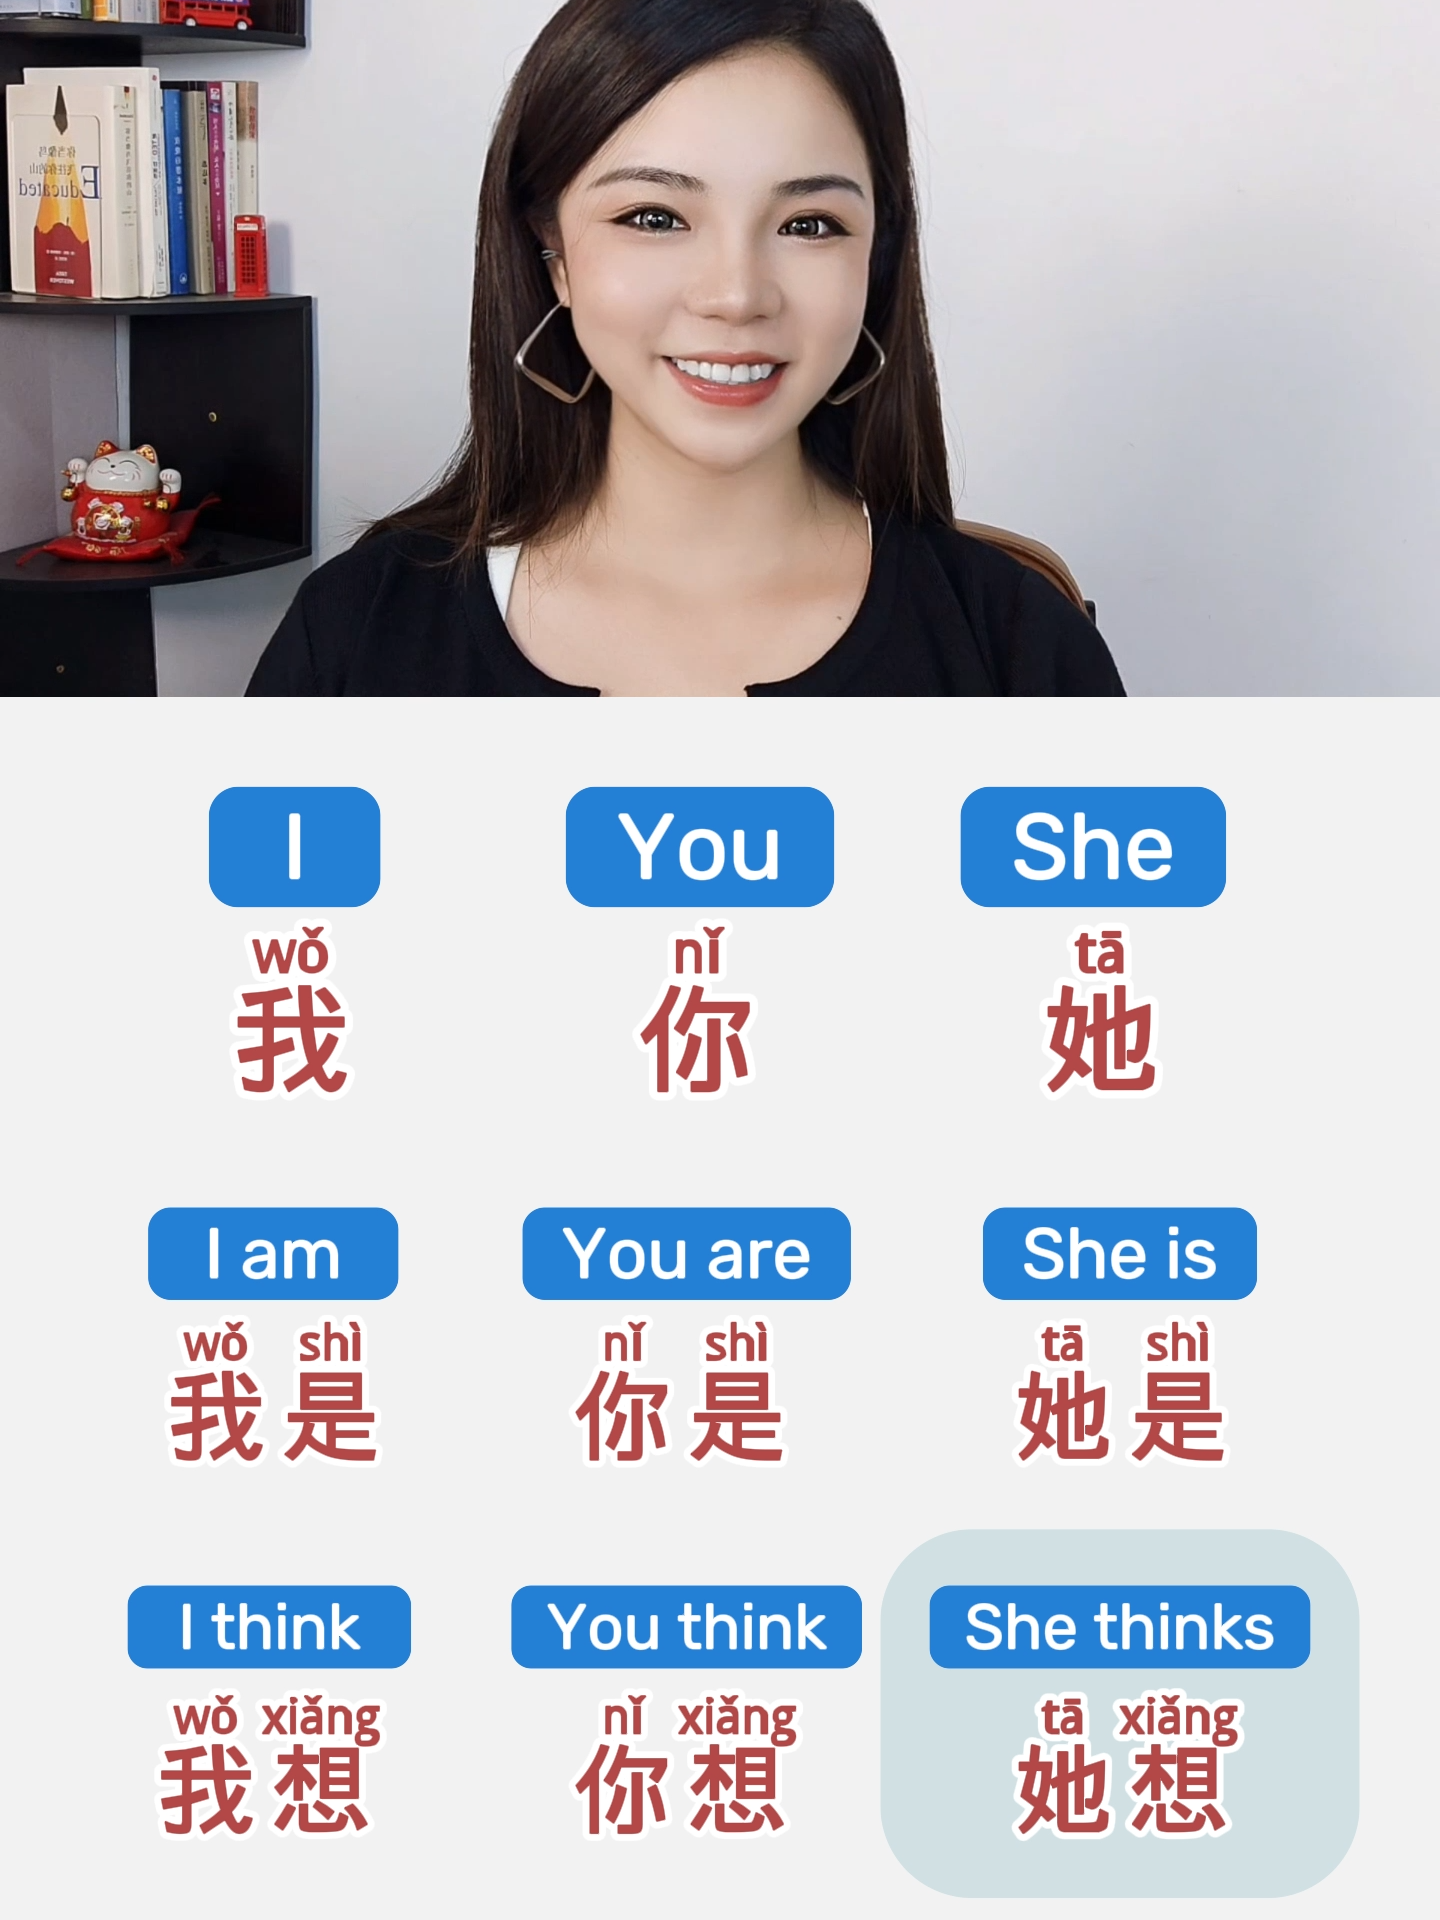 Chinese Pronouns and Verbs, let's go!  #learnchinese #languagelearning #chinese #mandarin #chineseteacher #chineselearning #learnmandarin #chineseforbeginners #learnchineseonline #mandarinforbeginner #learnchineseonline #chinesepinyin #learnmandarinforbeginner #pinyin